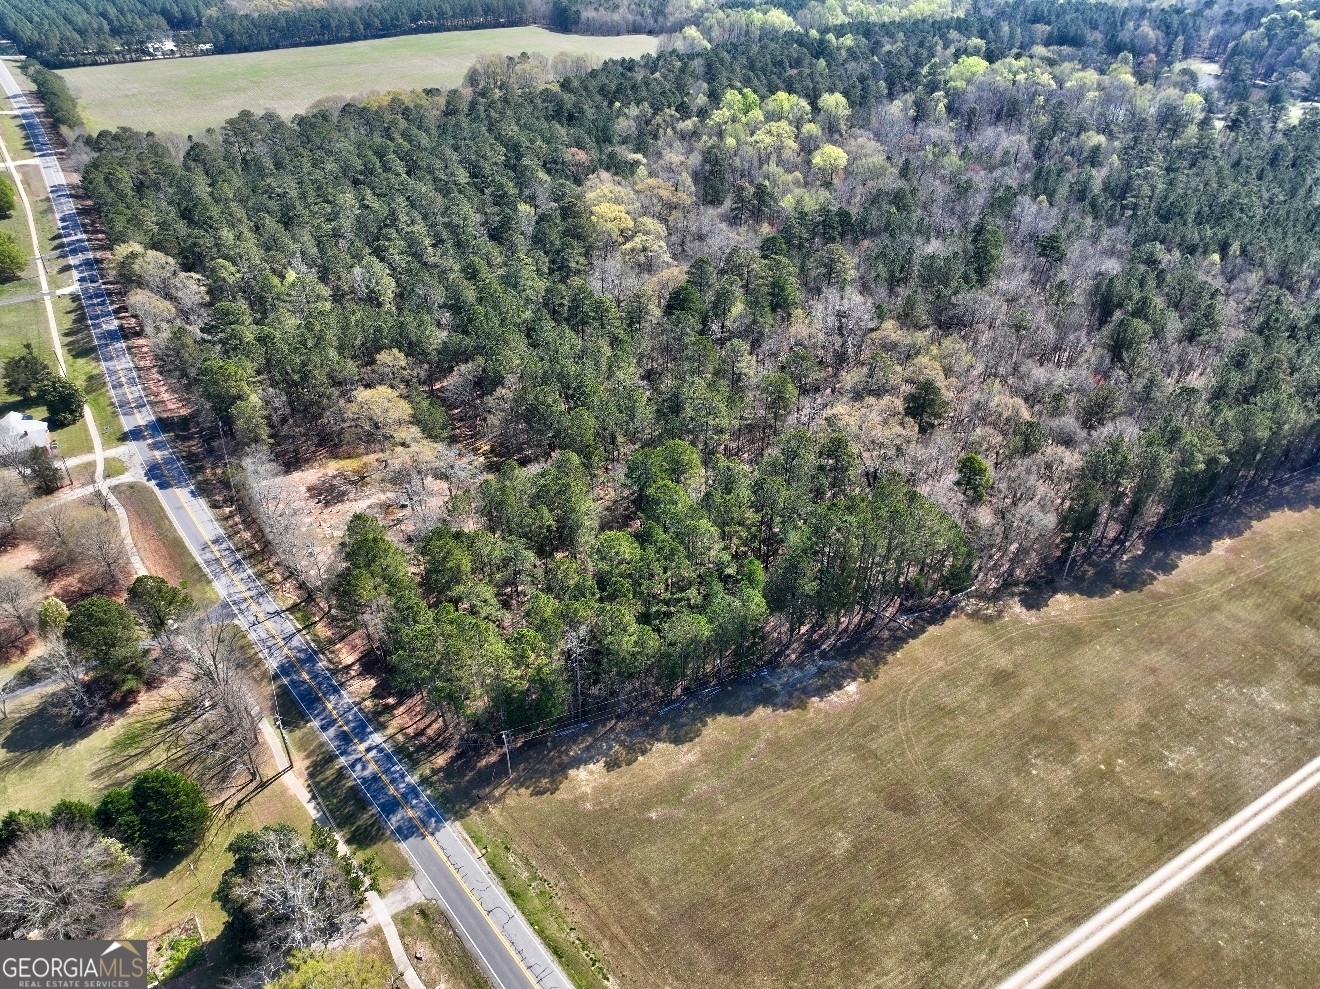 1. 205 Highway 186 Tract 2